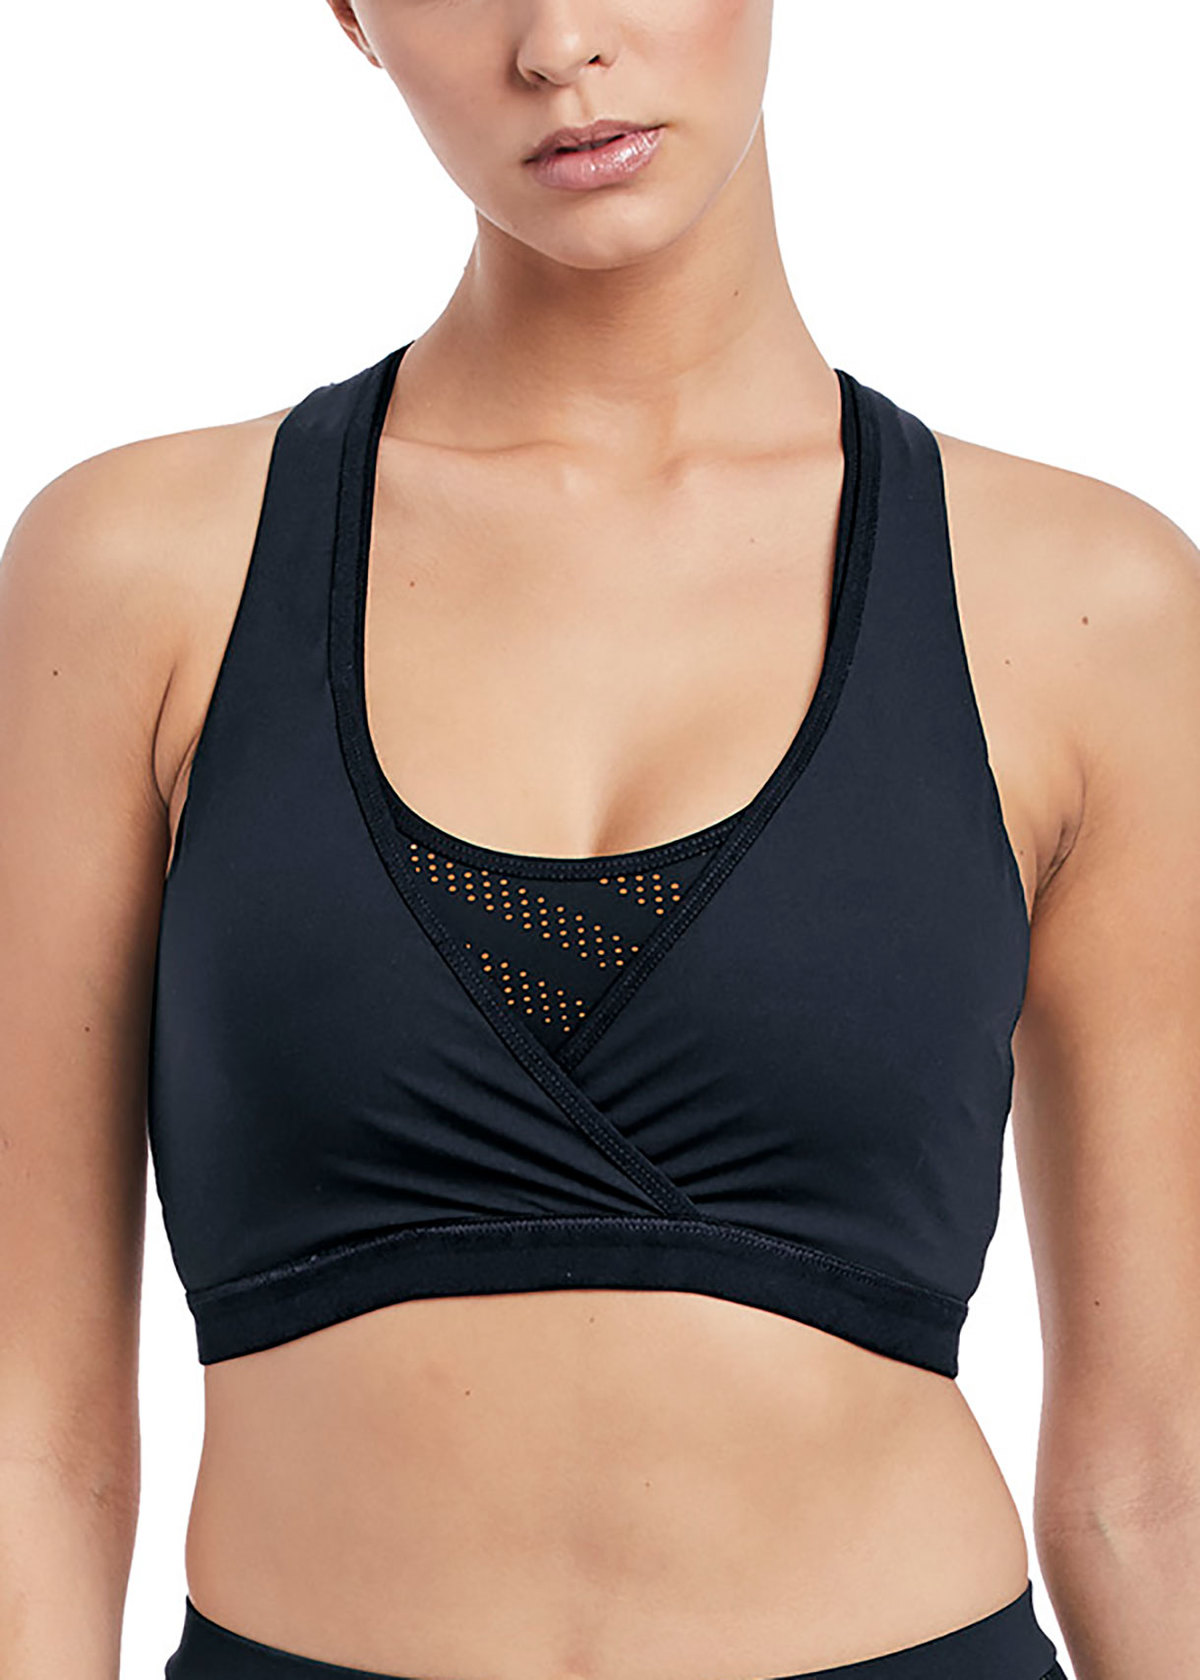 Sports Bra hack - how we changed the Kerri to have the best of all worlds